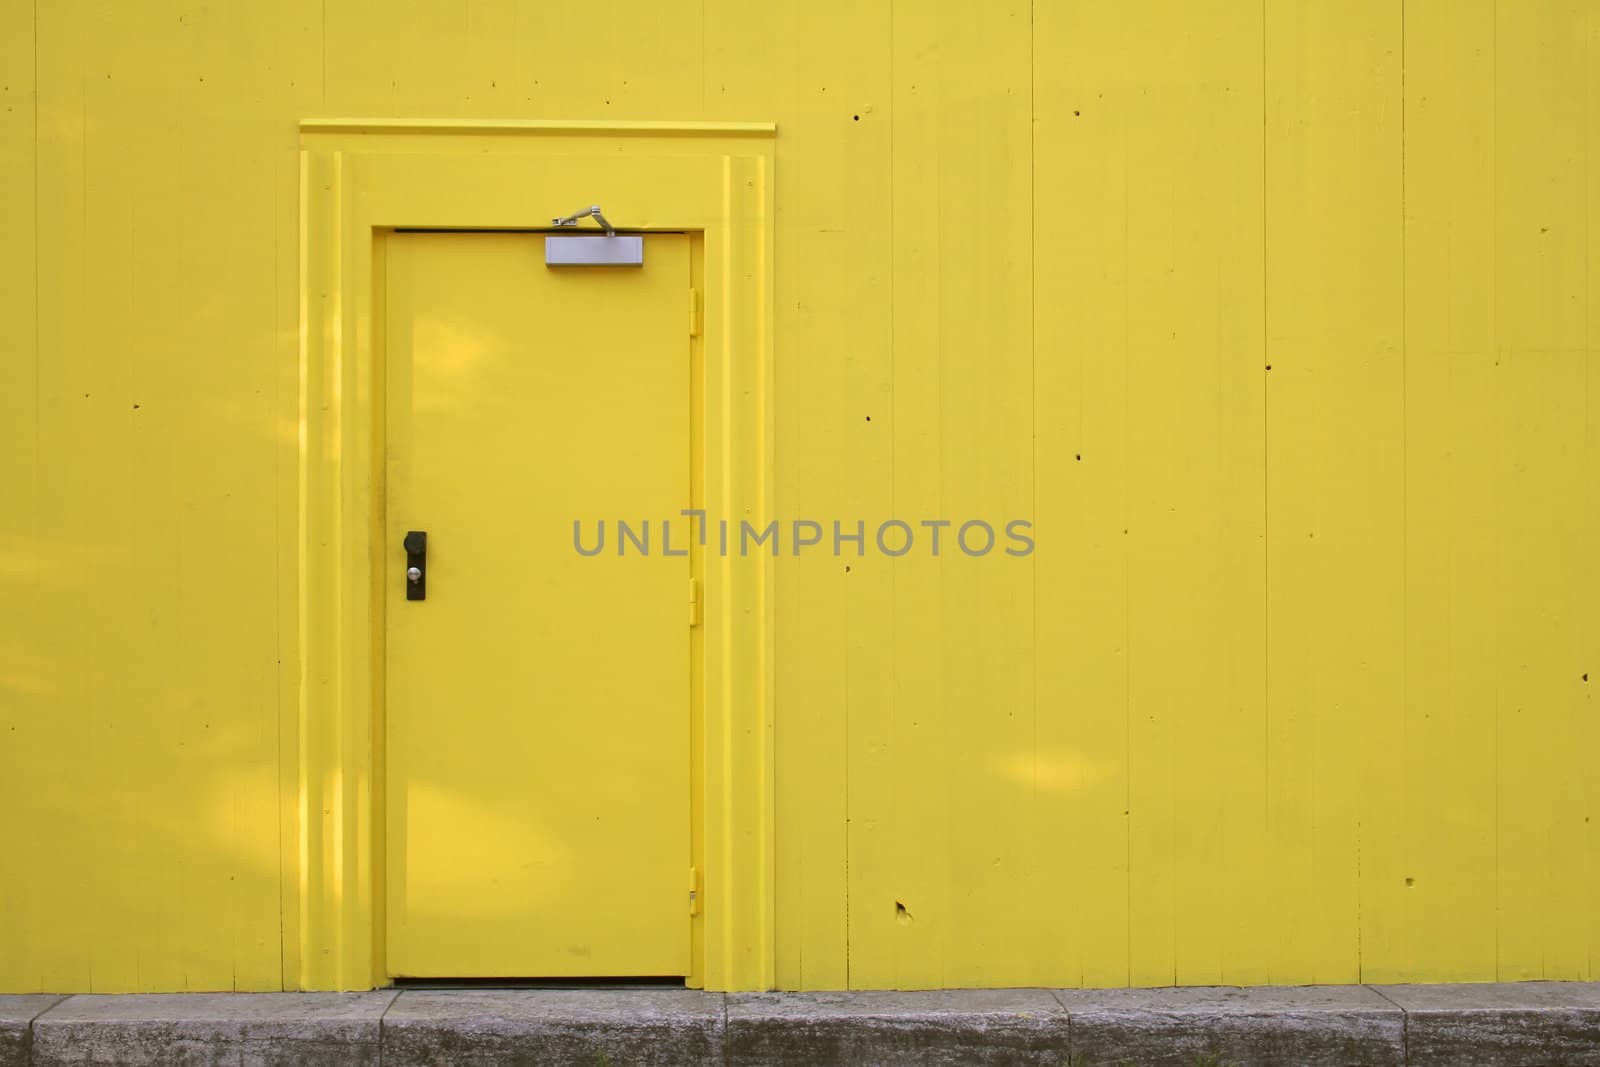 Metal door in a wooden wall. Everything painted yellow. Lots of copyspace.